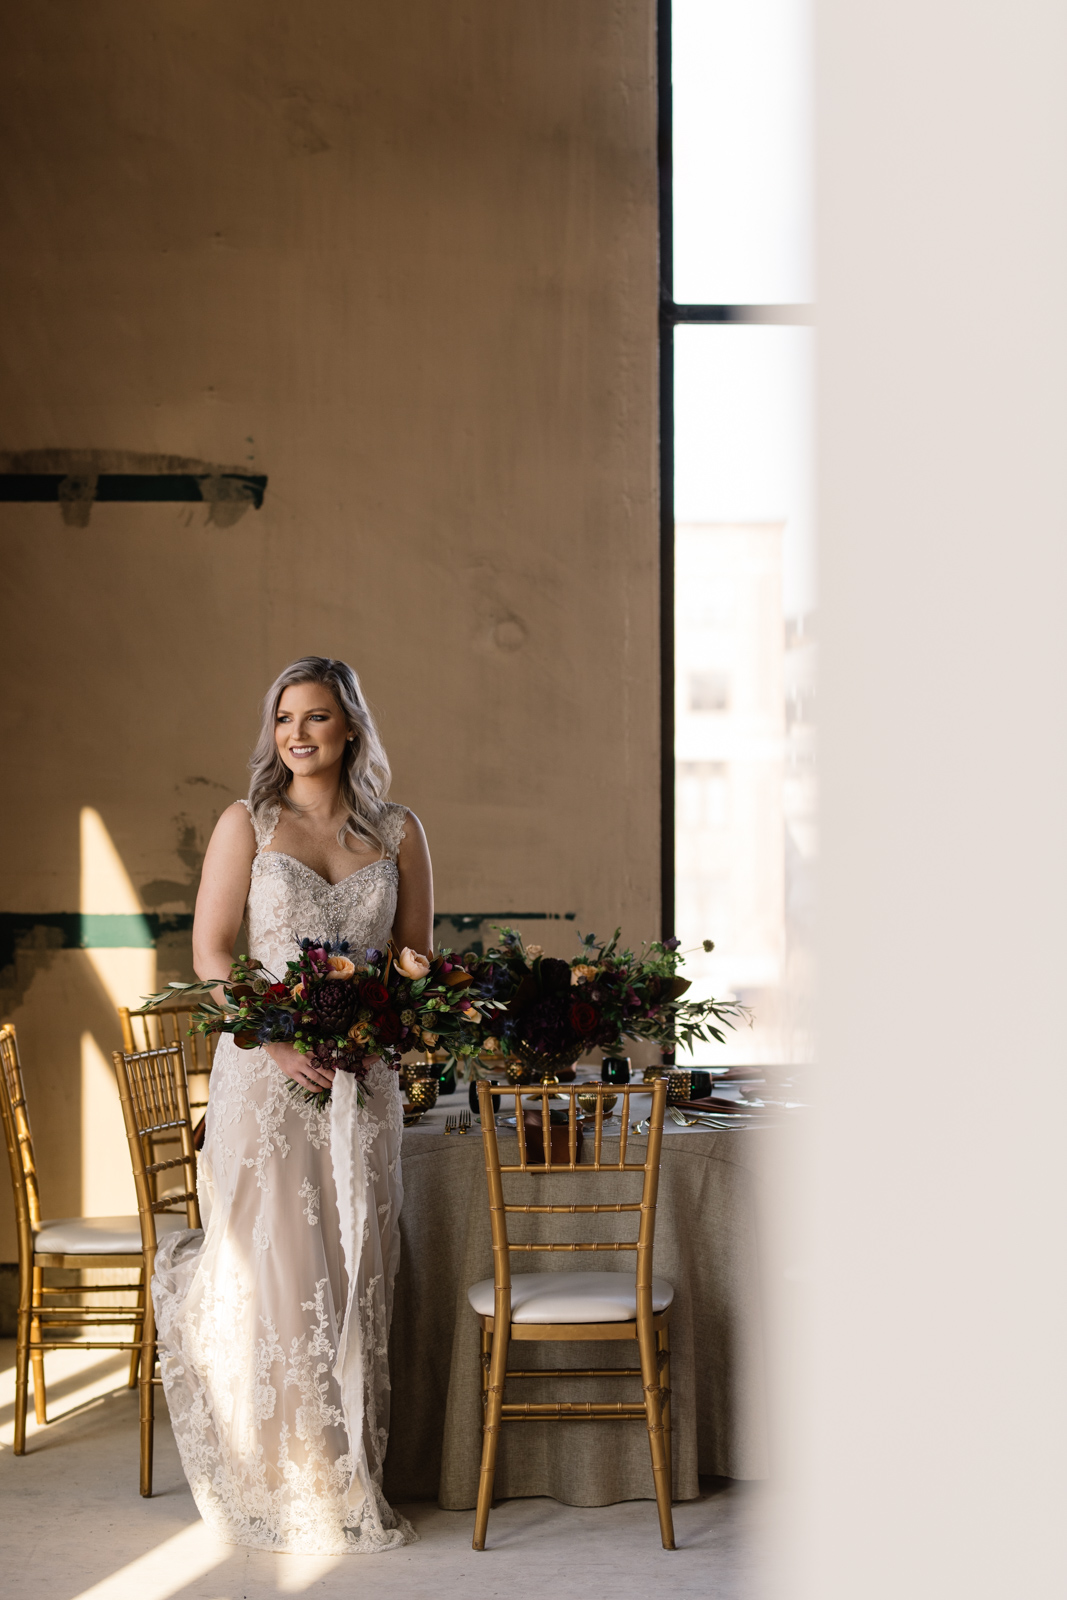 Cedar Rapids Wedding | The Olympic South Side Theater Wedding Venue | Styled Shoot